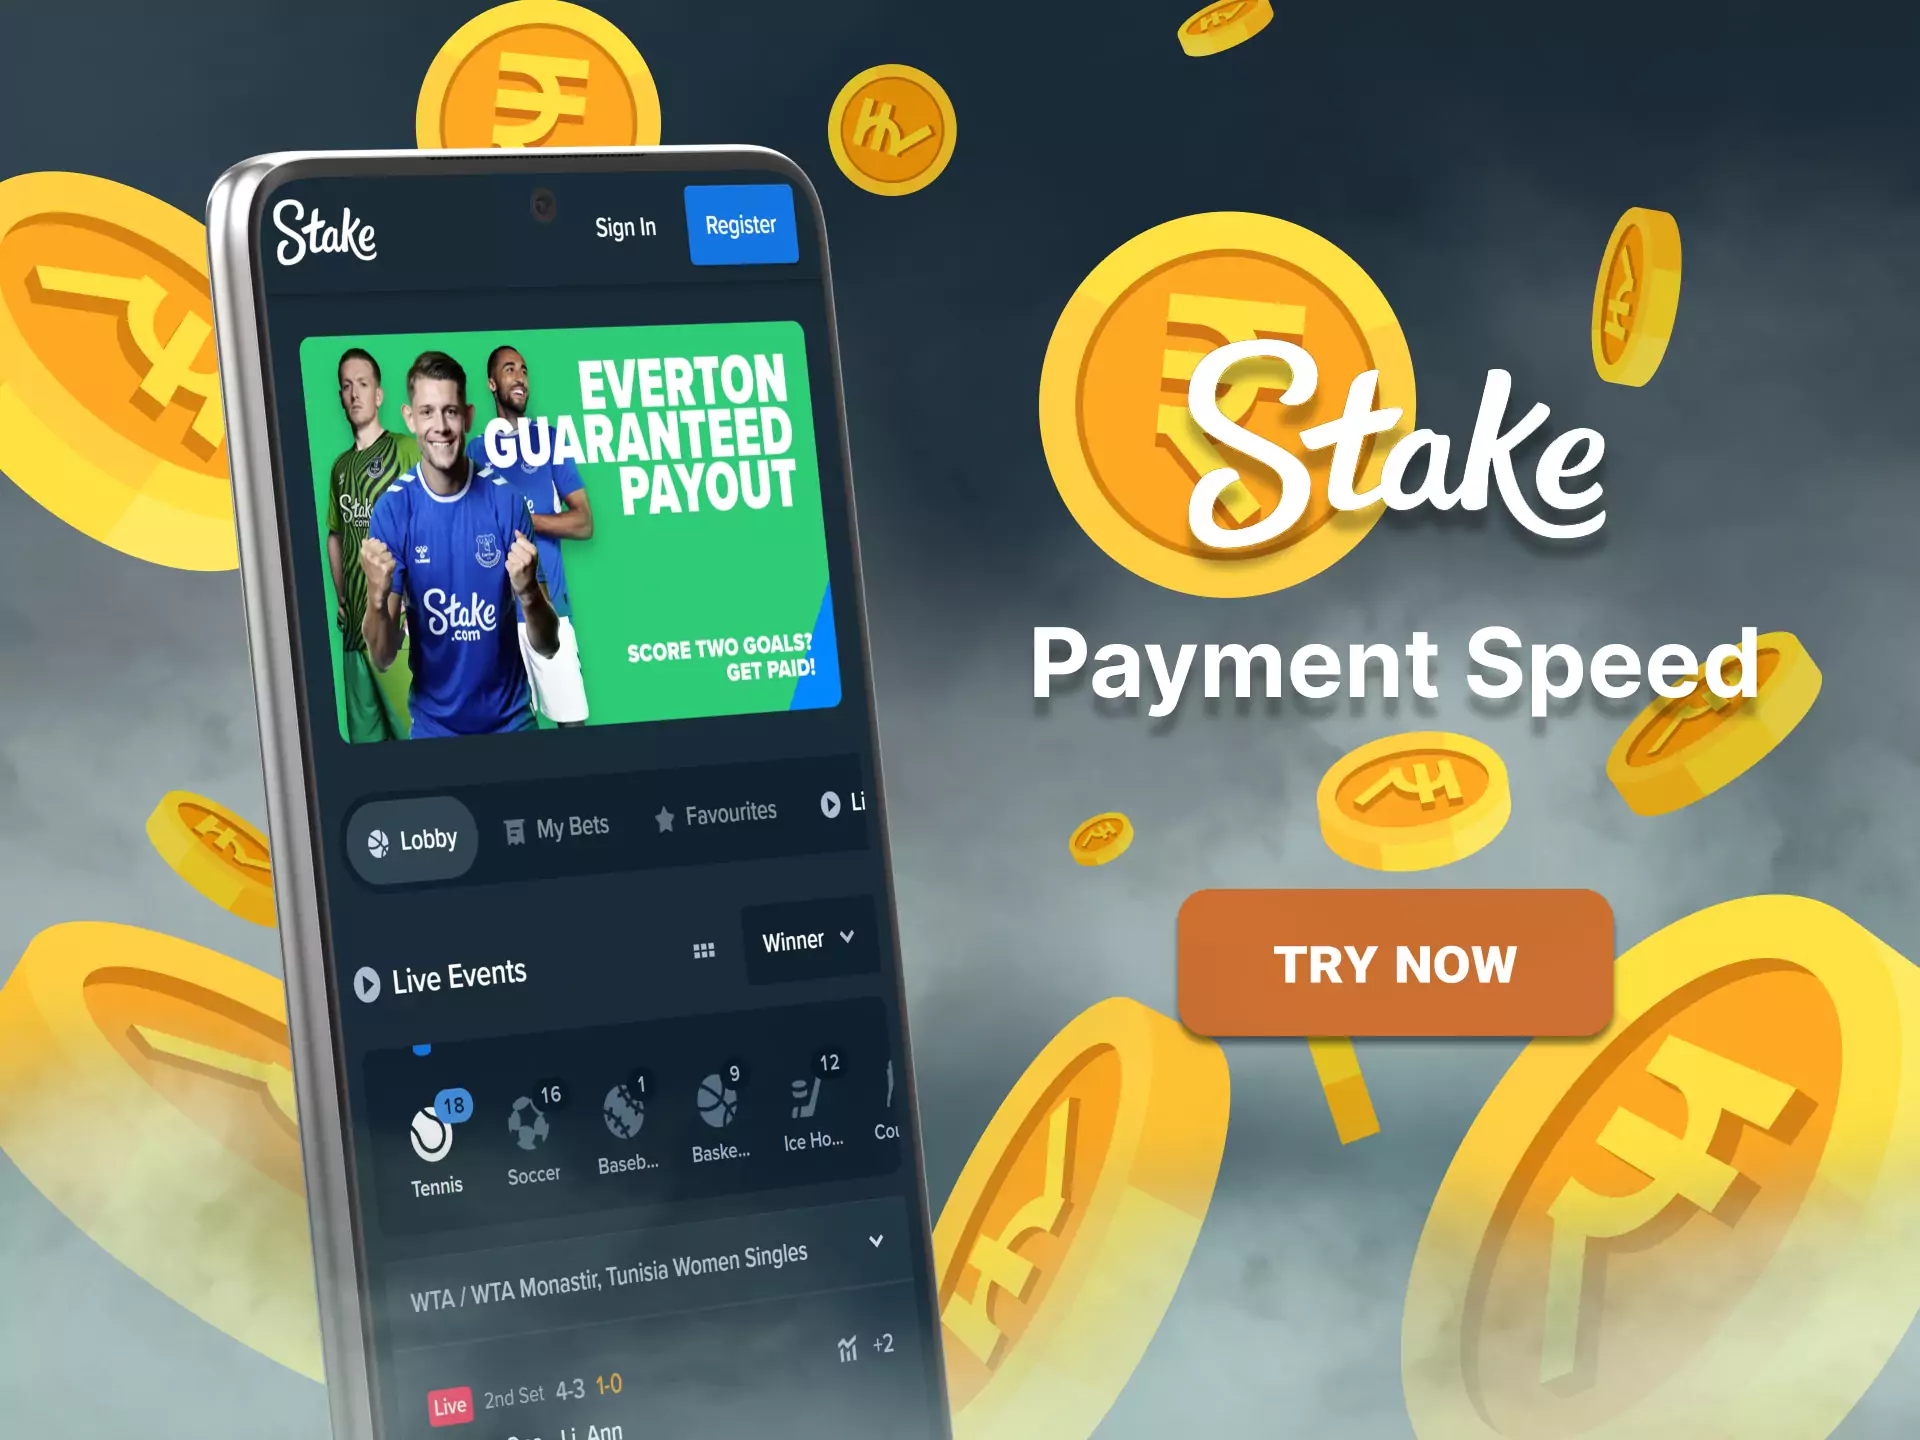 Get payouts Stake.com quick and easy.